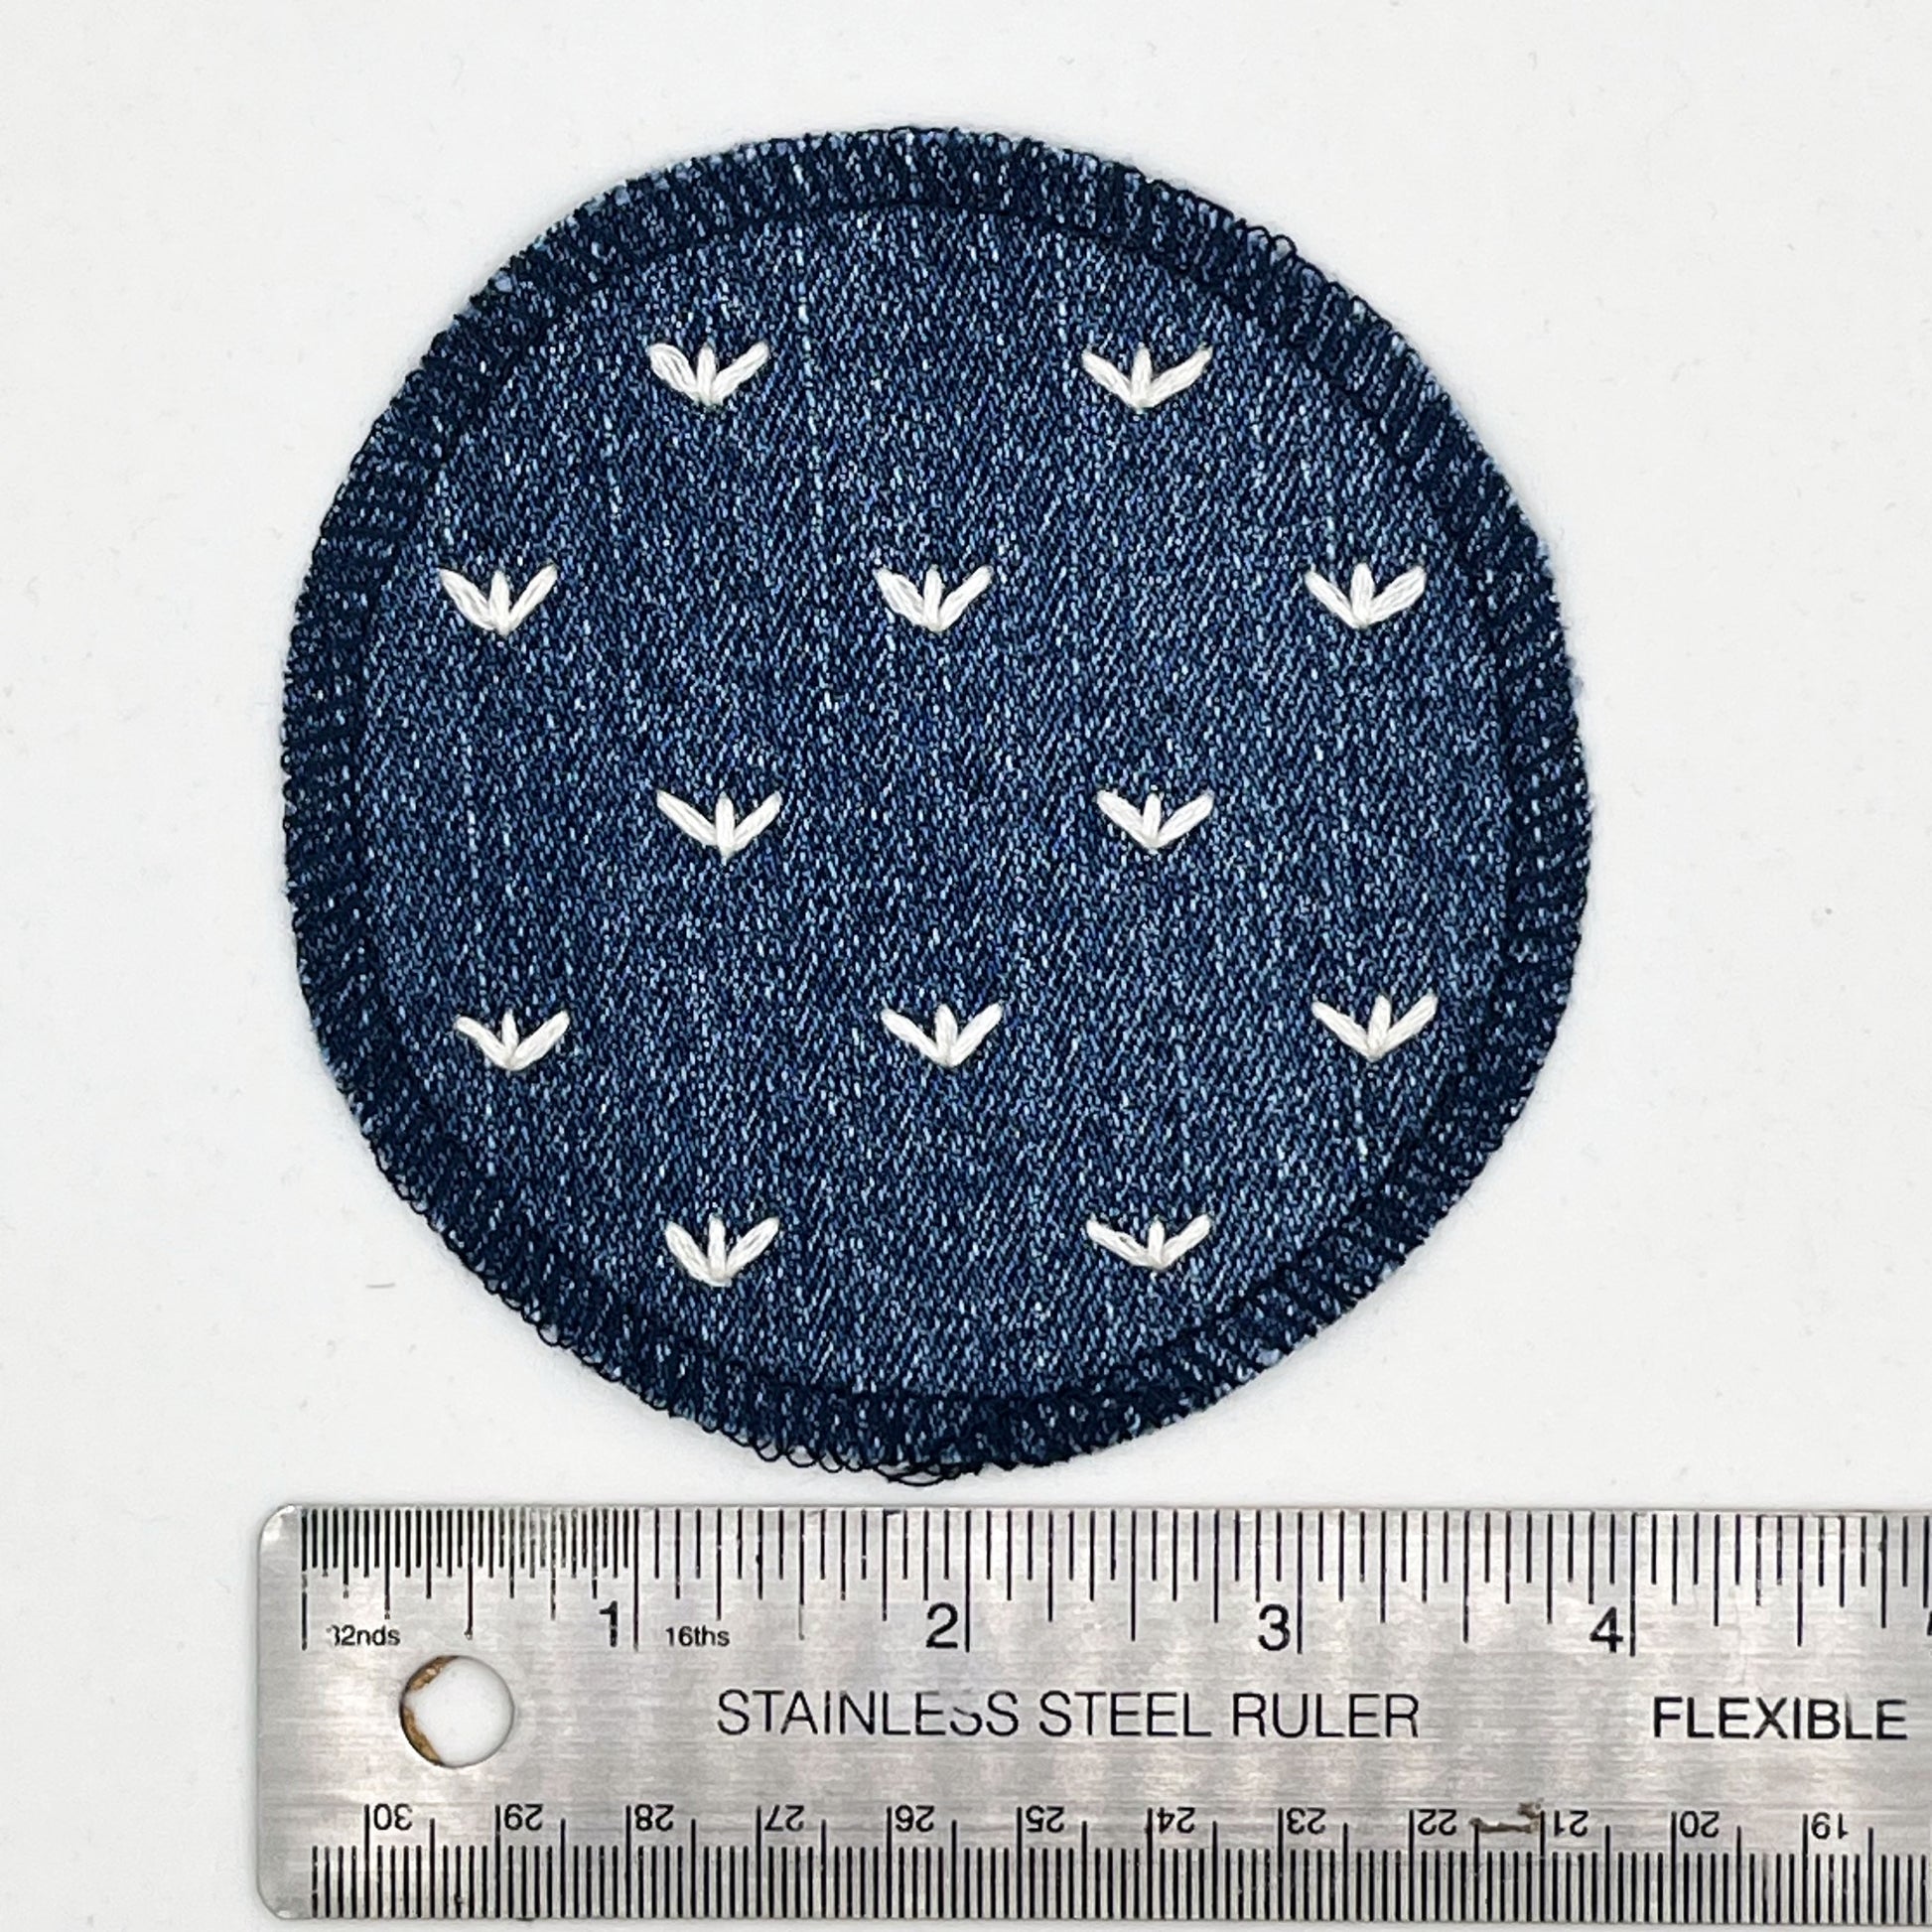 a circle shaped patch made out of denim, with overlocked edges, with stitches in ivory that look like sprouts or birds feet, next to a metal ruler to show a diameter or 4 inches, on a white background